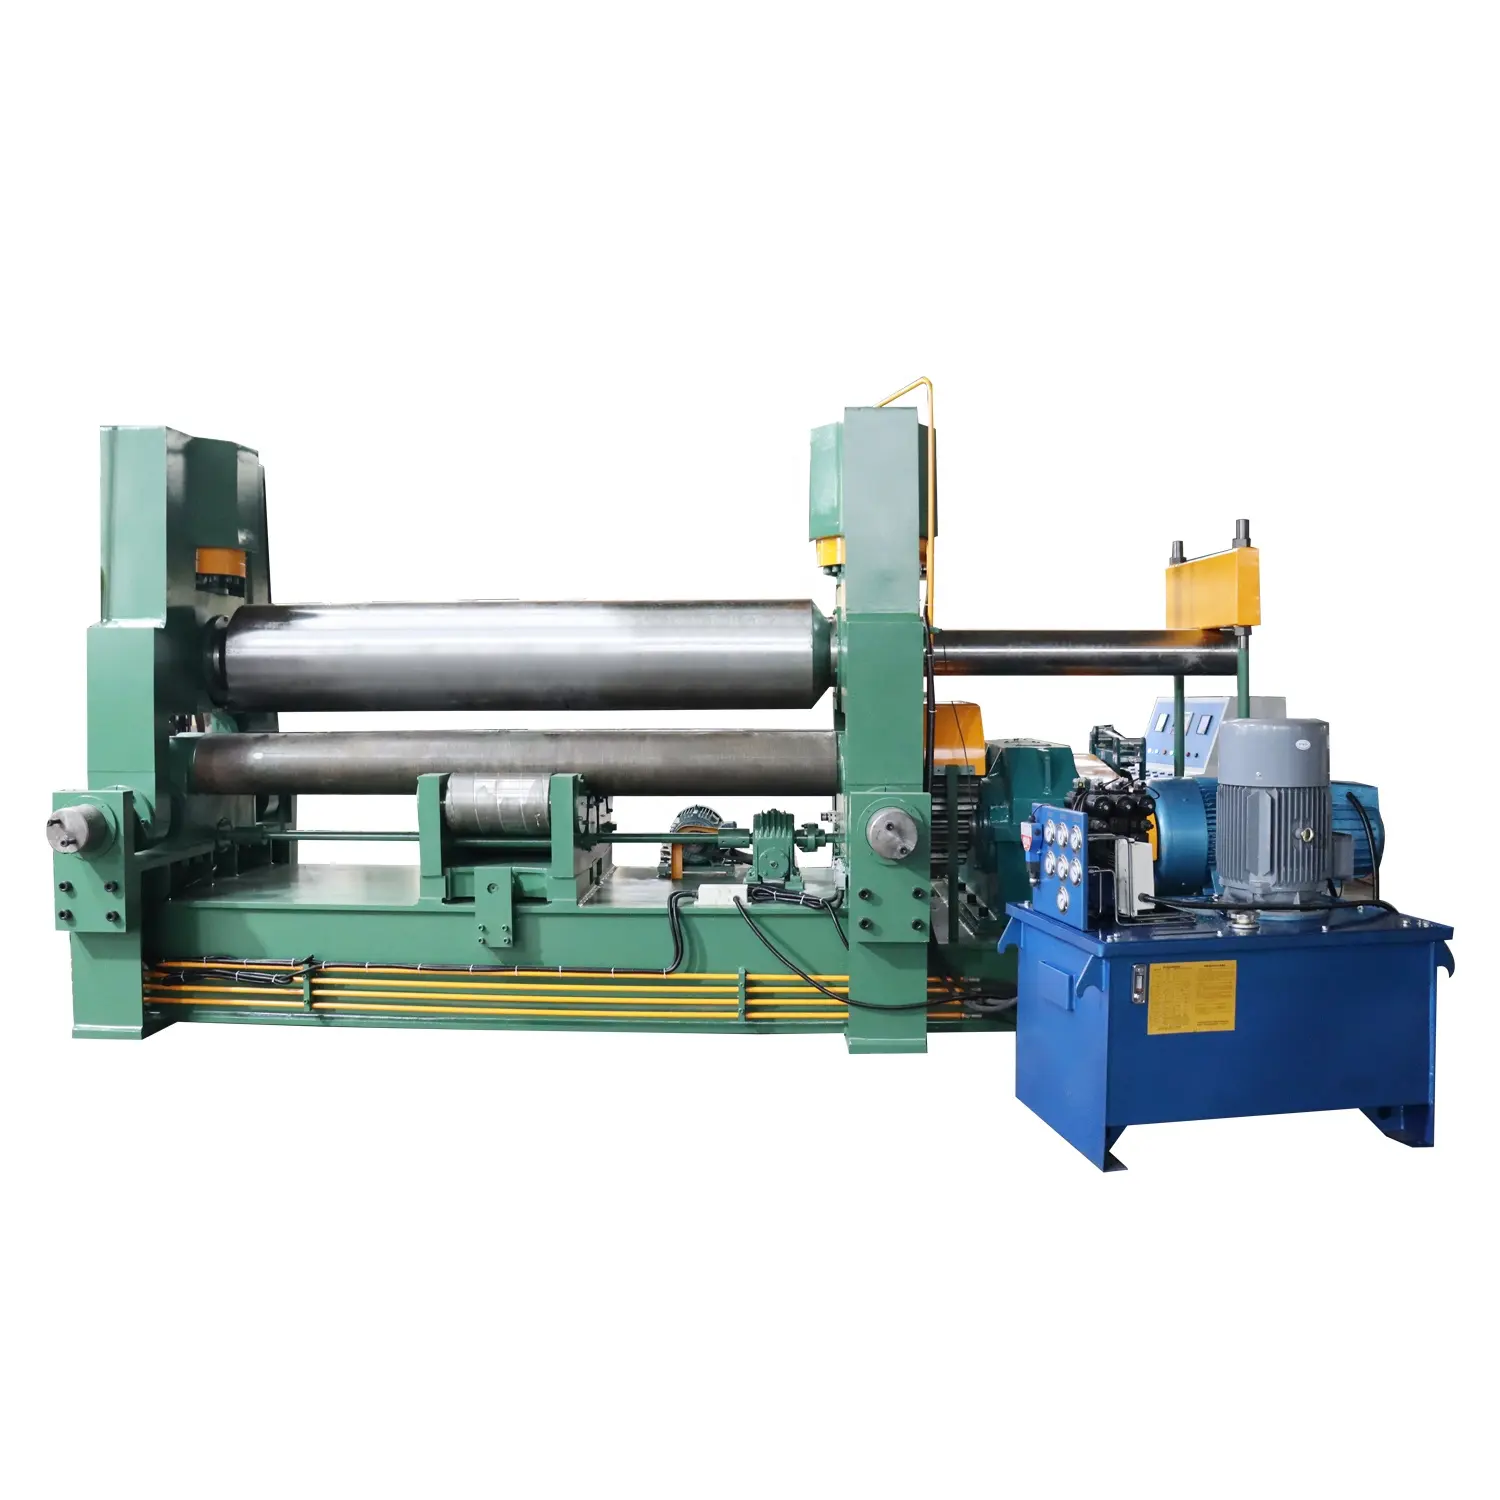 Roller Conventional Roller Cylinder Bending Machine End Plate for Roll Hydraulic Upper Roller Universal Plate Rolls Bending